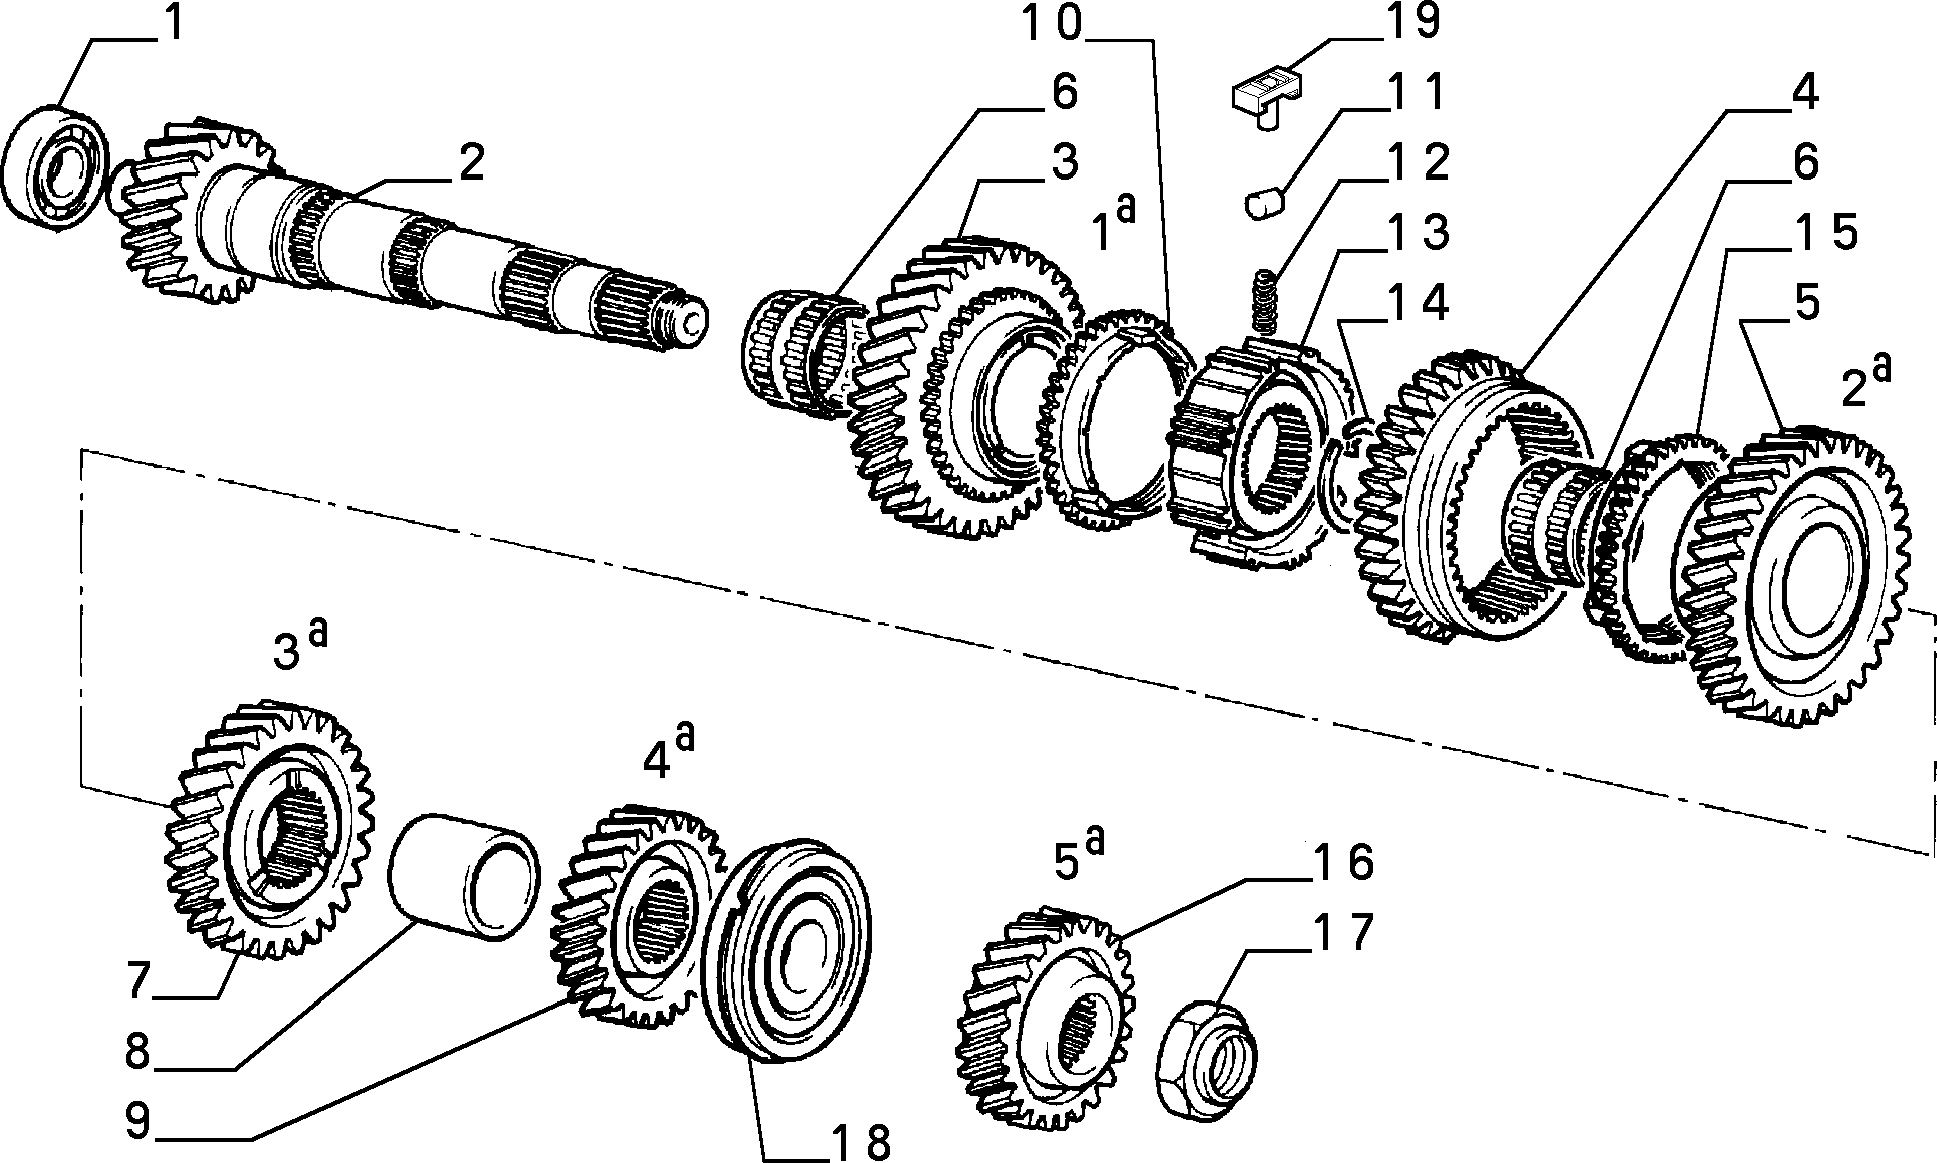 TRANSMISSION GEARS pour Fiat COUPE COUPE' GAMMA'96 (1996 - 2000)